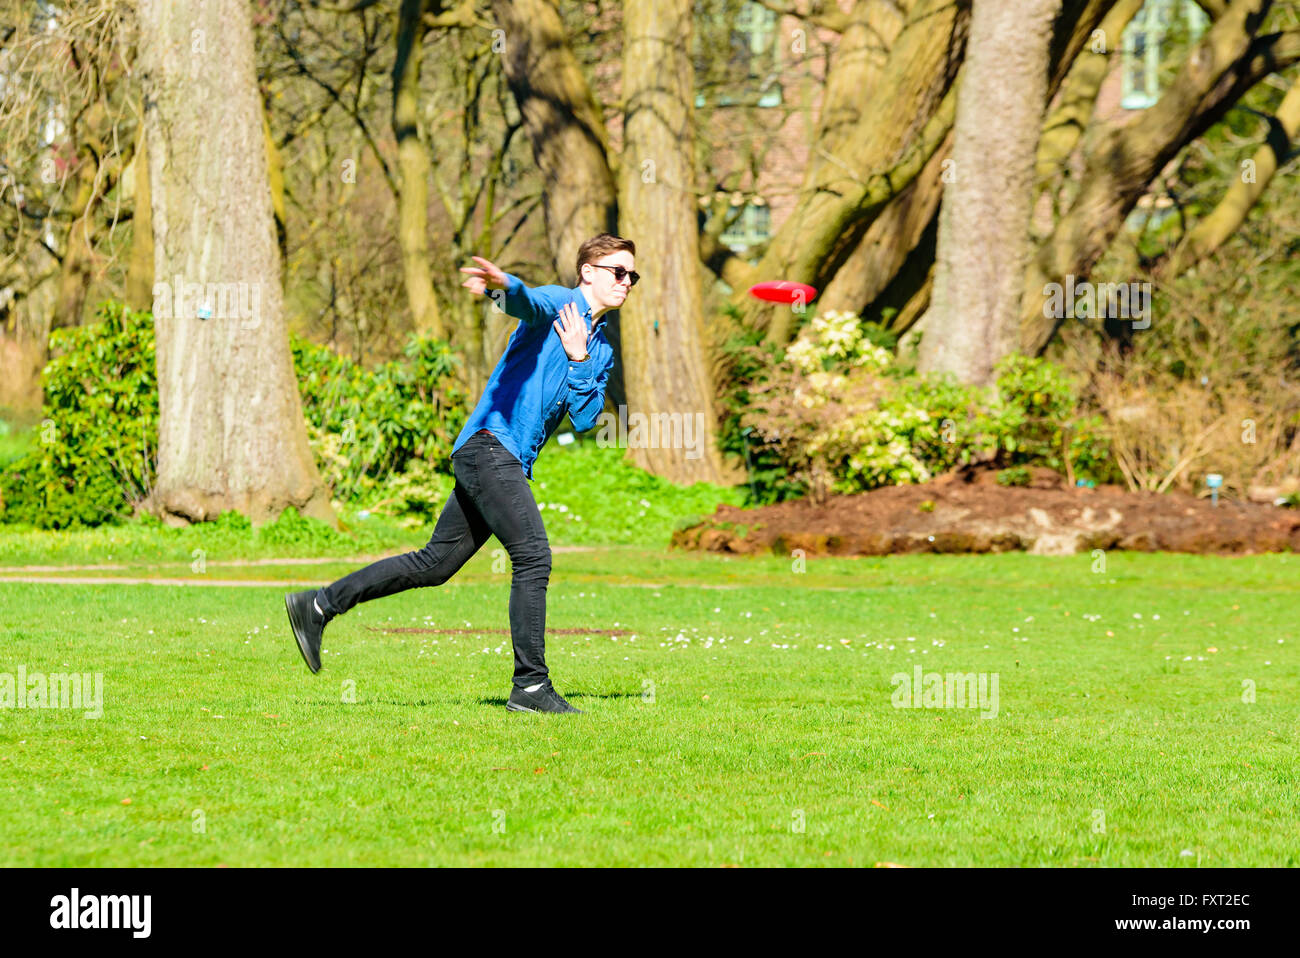 Lund, Sweden - April 11, 2016: Everyday city life. Young adult man in a park is throwing a flying disc. He is making an effort, Stock Photo